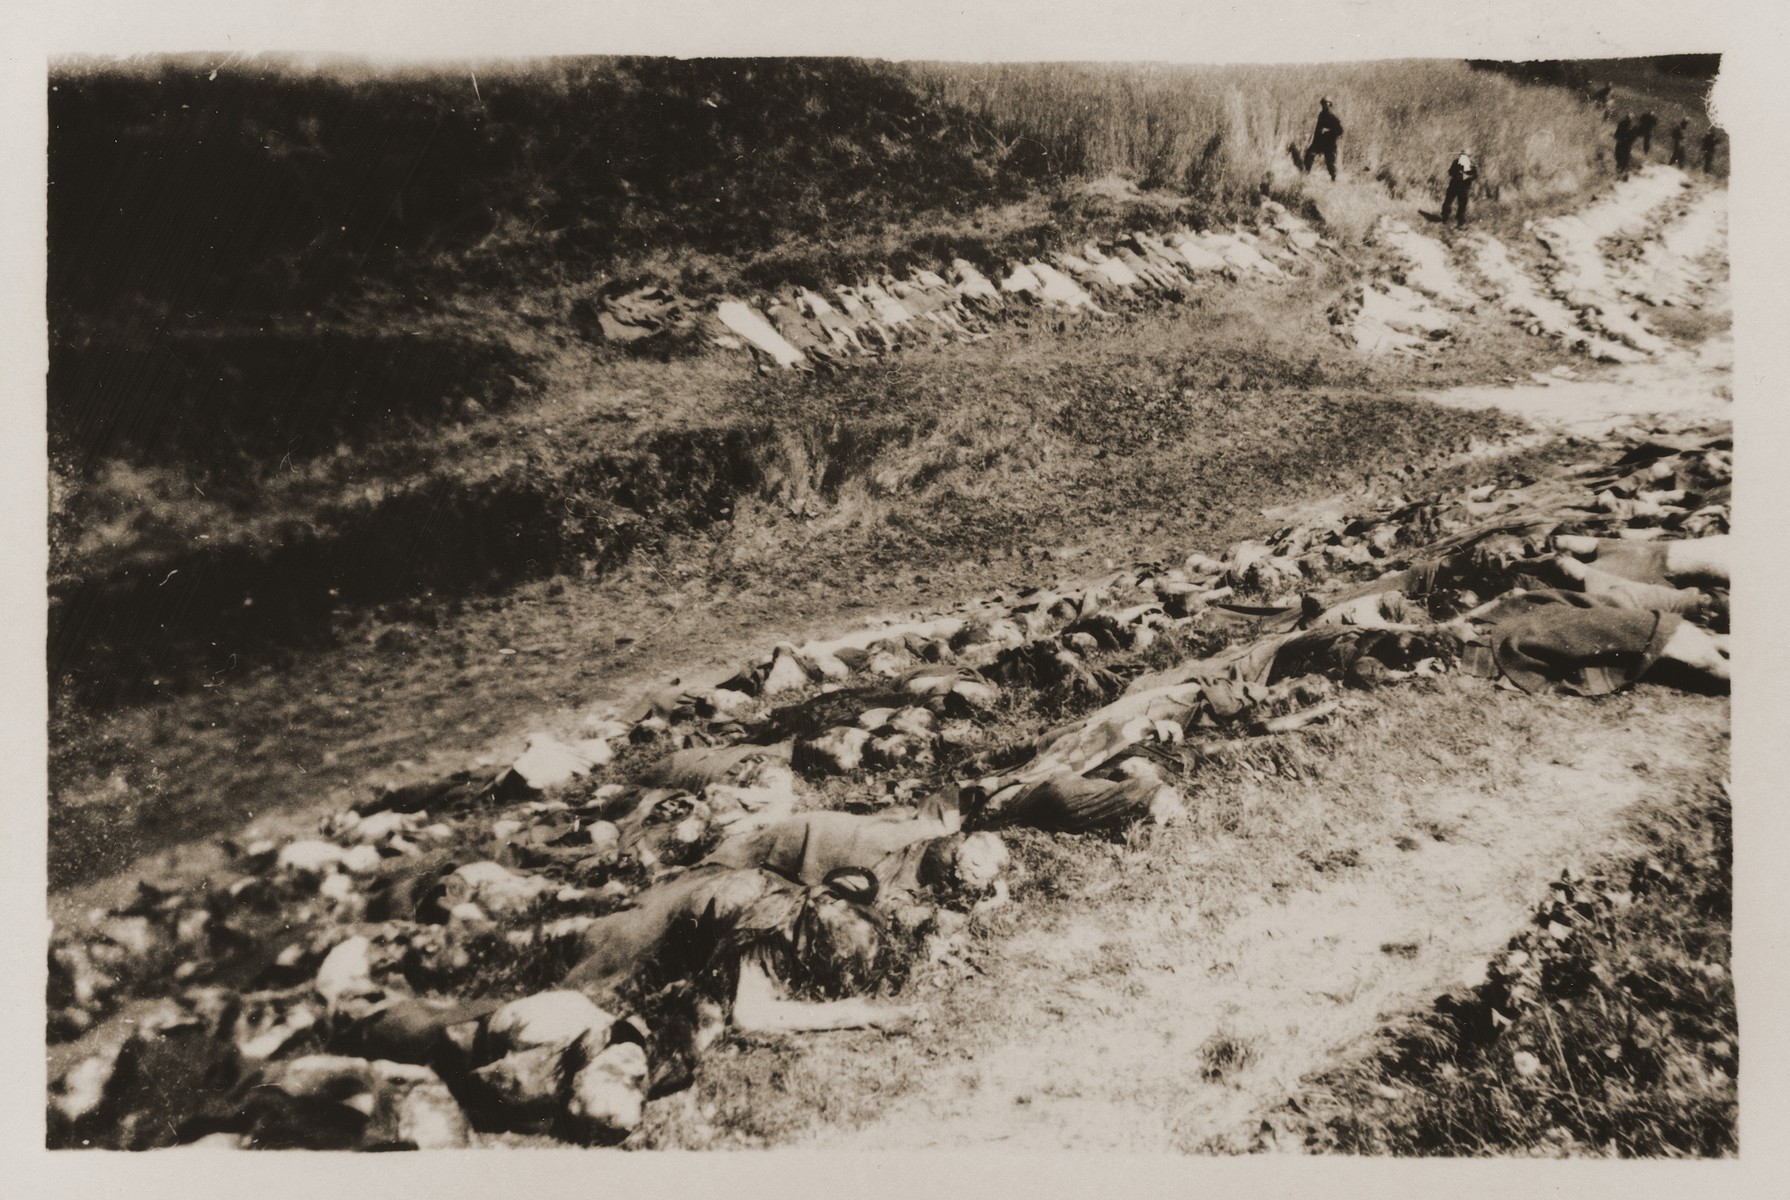 The corpses of prisoners exhumed from a mass grave line the sides of a ravine near the town of Nammering.  German civilians were forced to visit the site by U.S. troops.